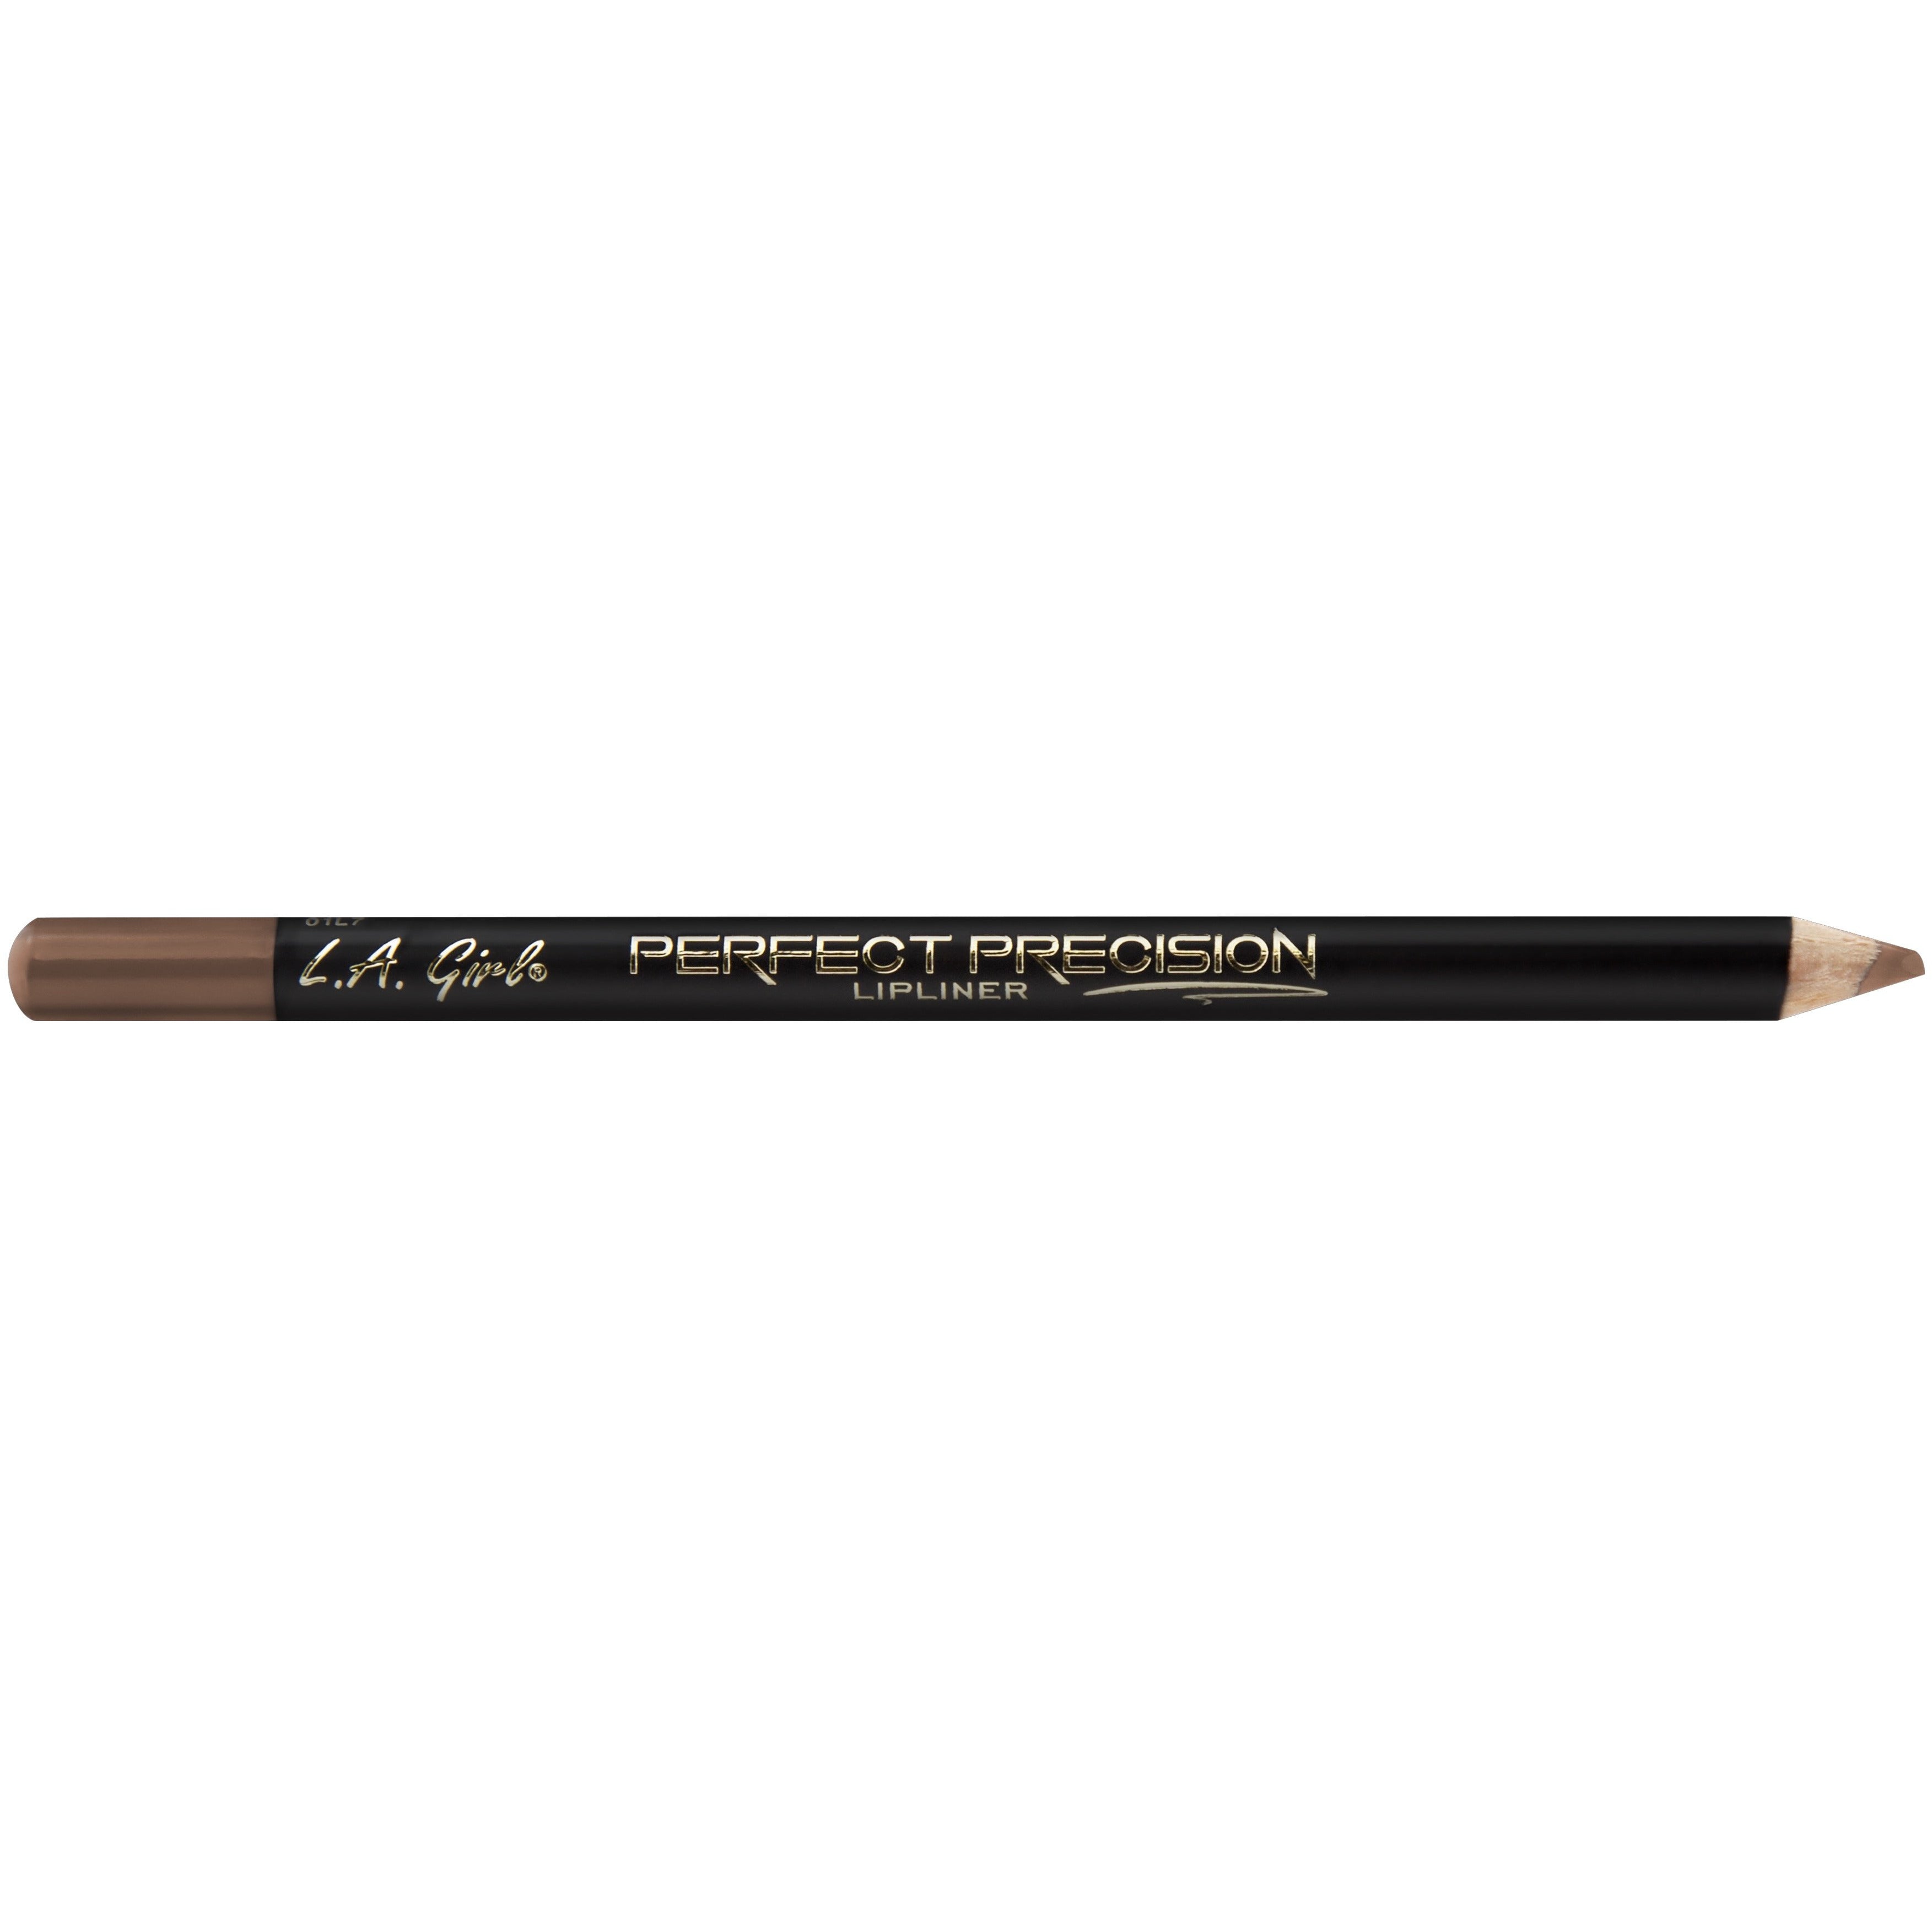 Perfect Precision Lip Liner | L.A.Girl - Give Us Beauty